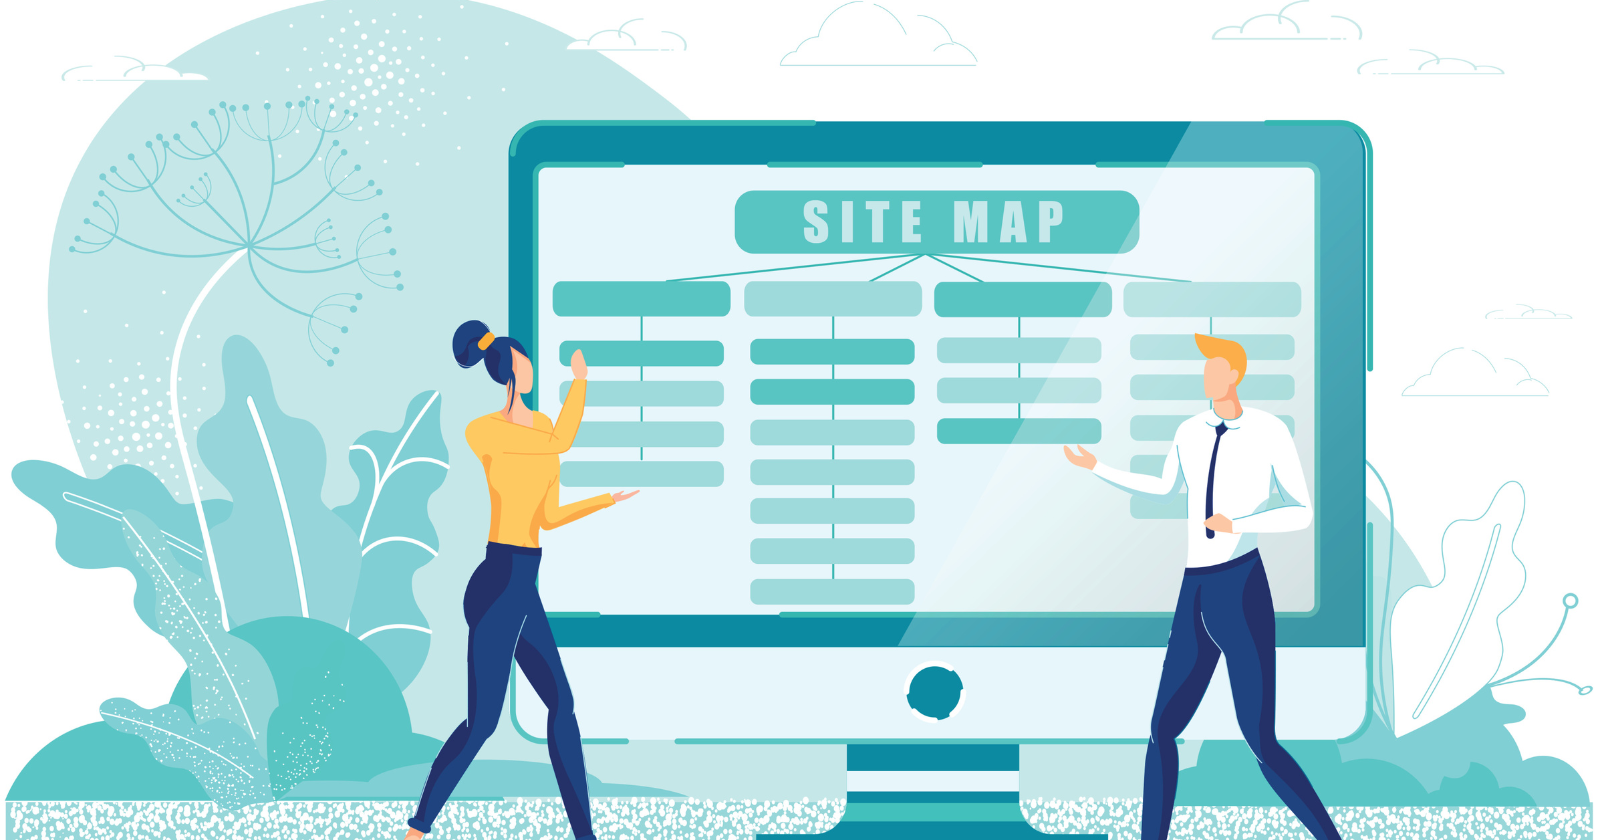 sitemap examples 6306161920bfc sej